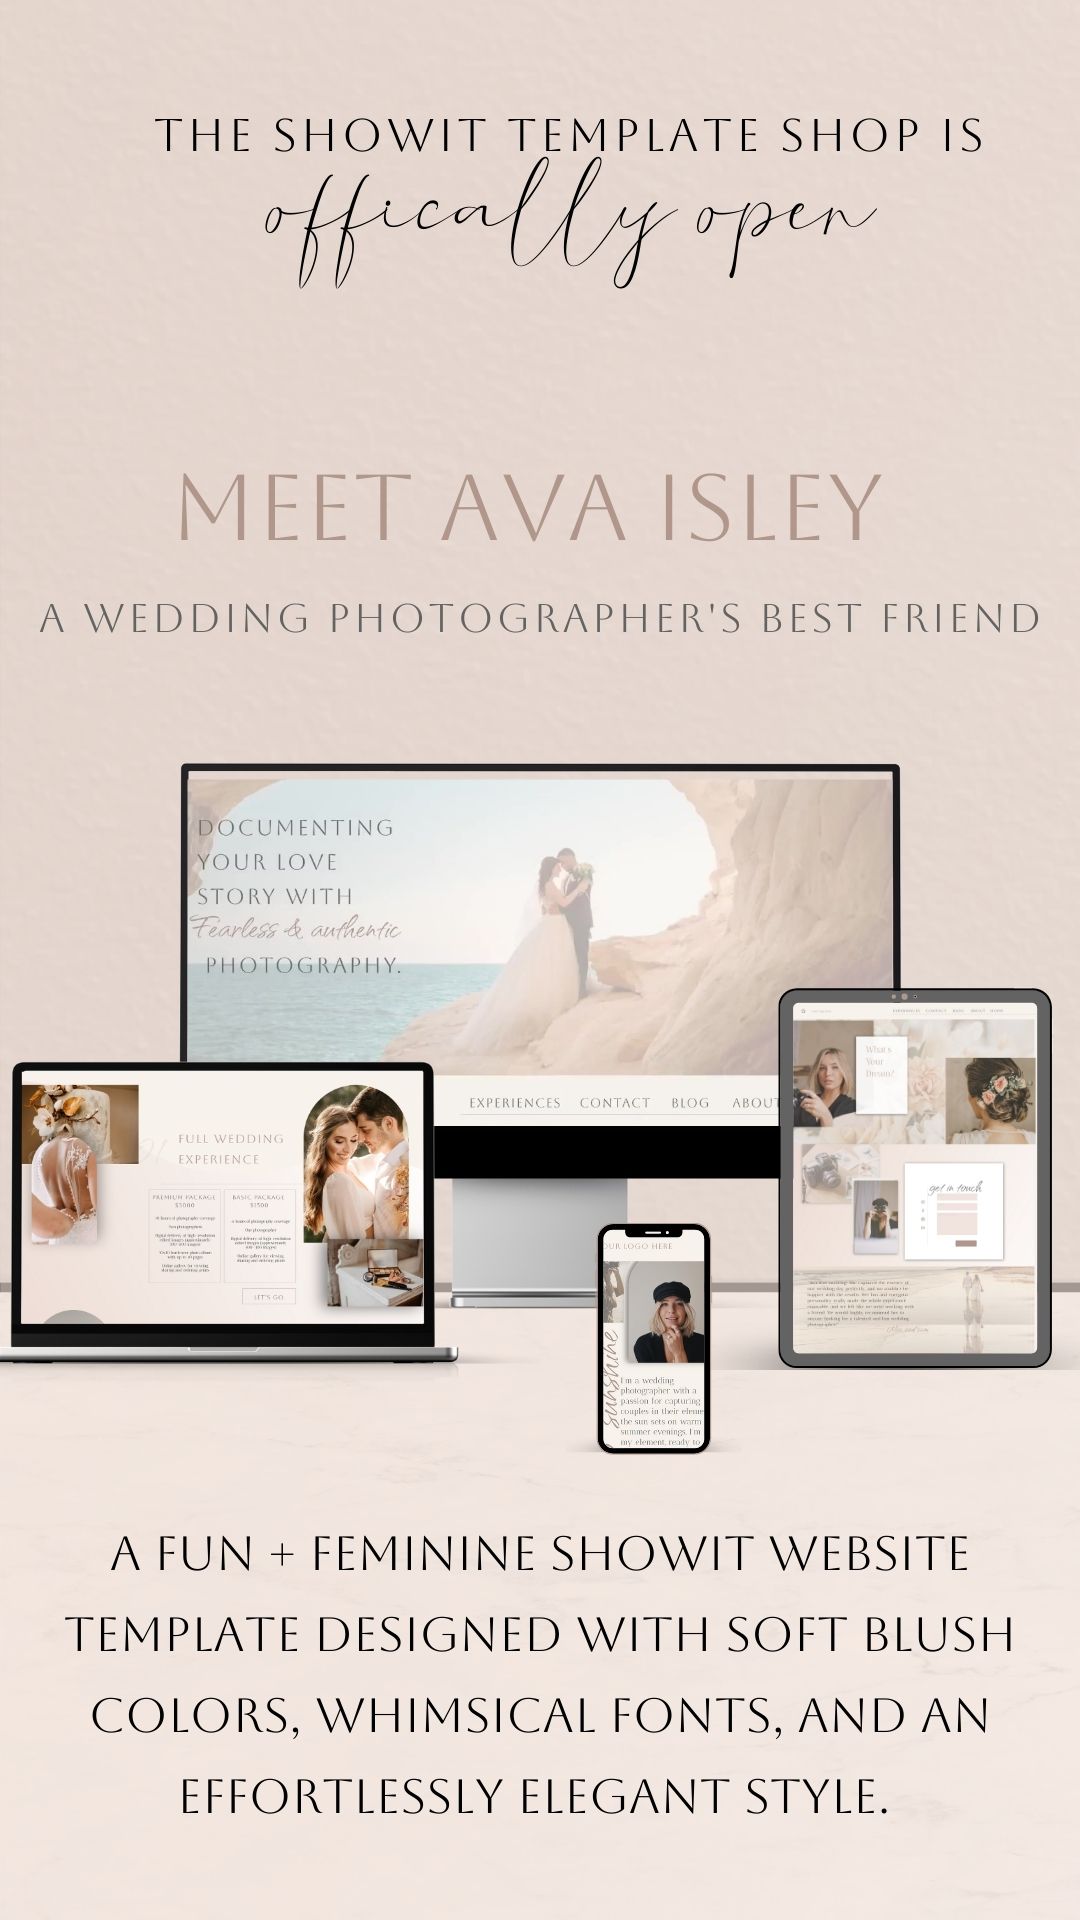 Meet Ava Isley, A fun + feminine Showit website template designed with soft blush colors, whimsical fonts, and an effortlessly elegant style.